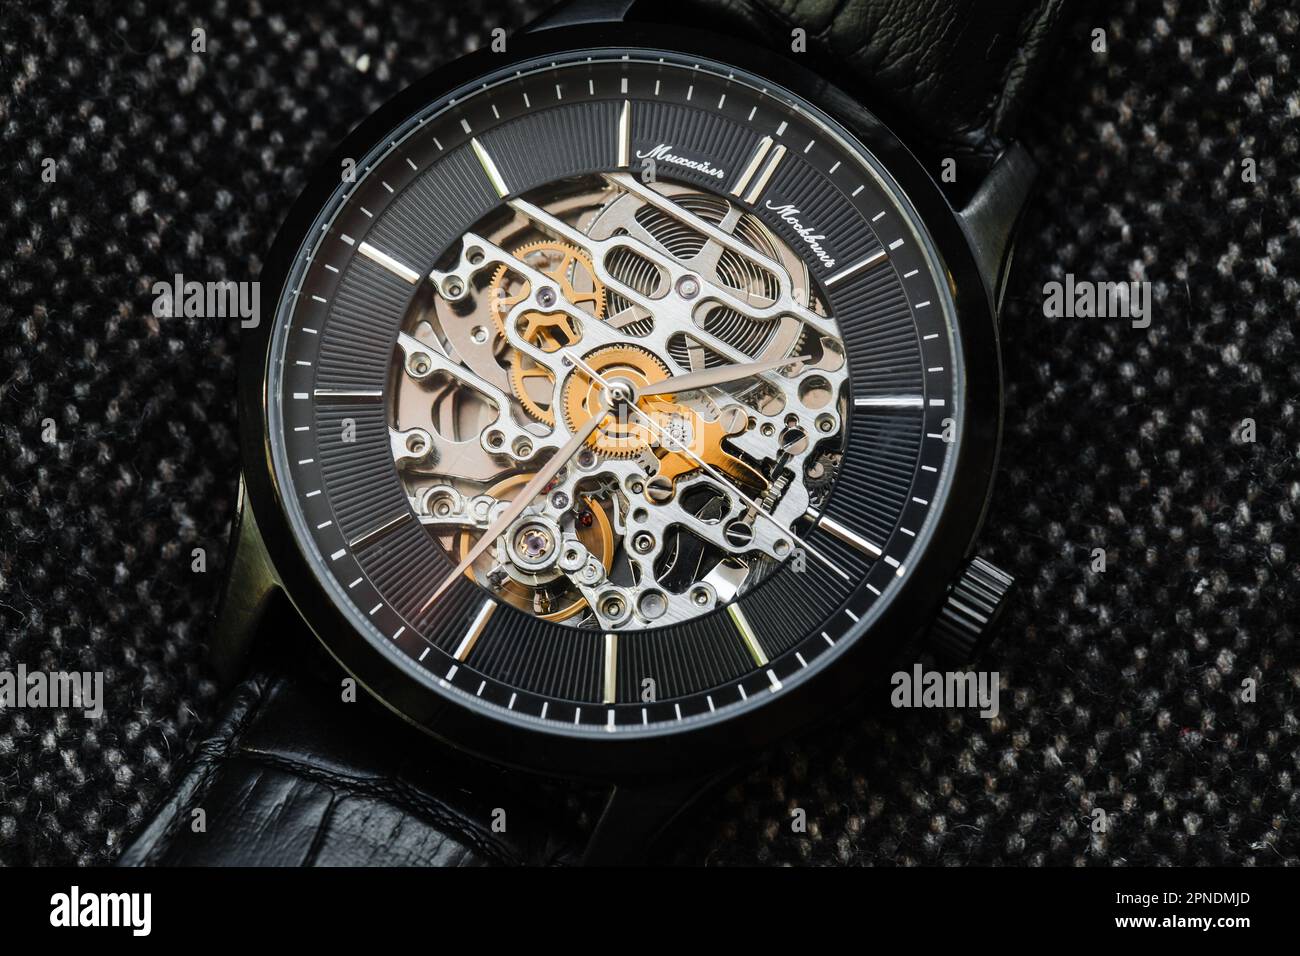 Uglich, Russia - February 1, 2021: Black clock face with steel details of Mikhail Moskvin skeleton watch by Uglich Watch Factory Stock Photo